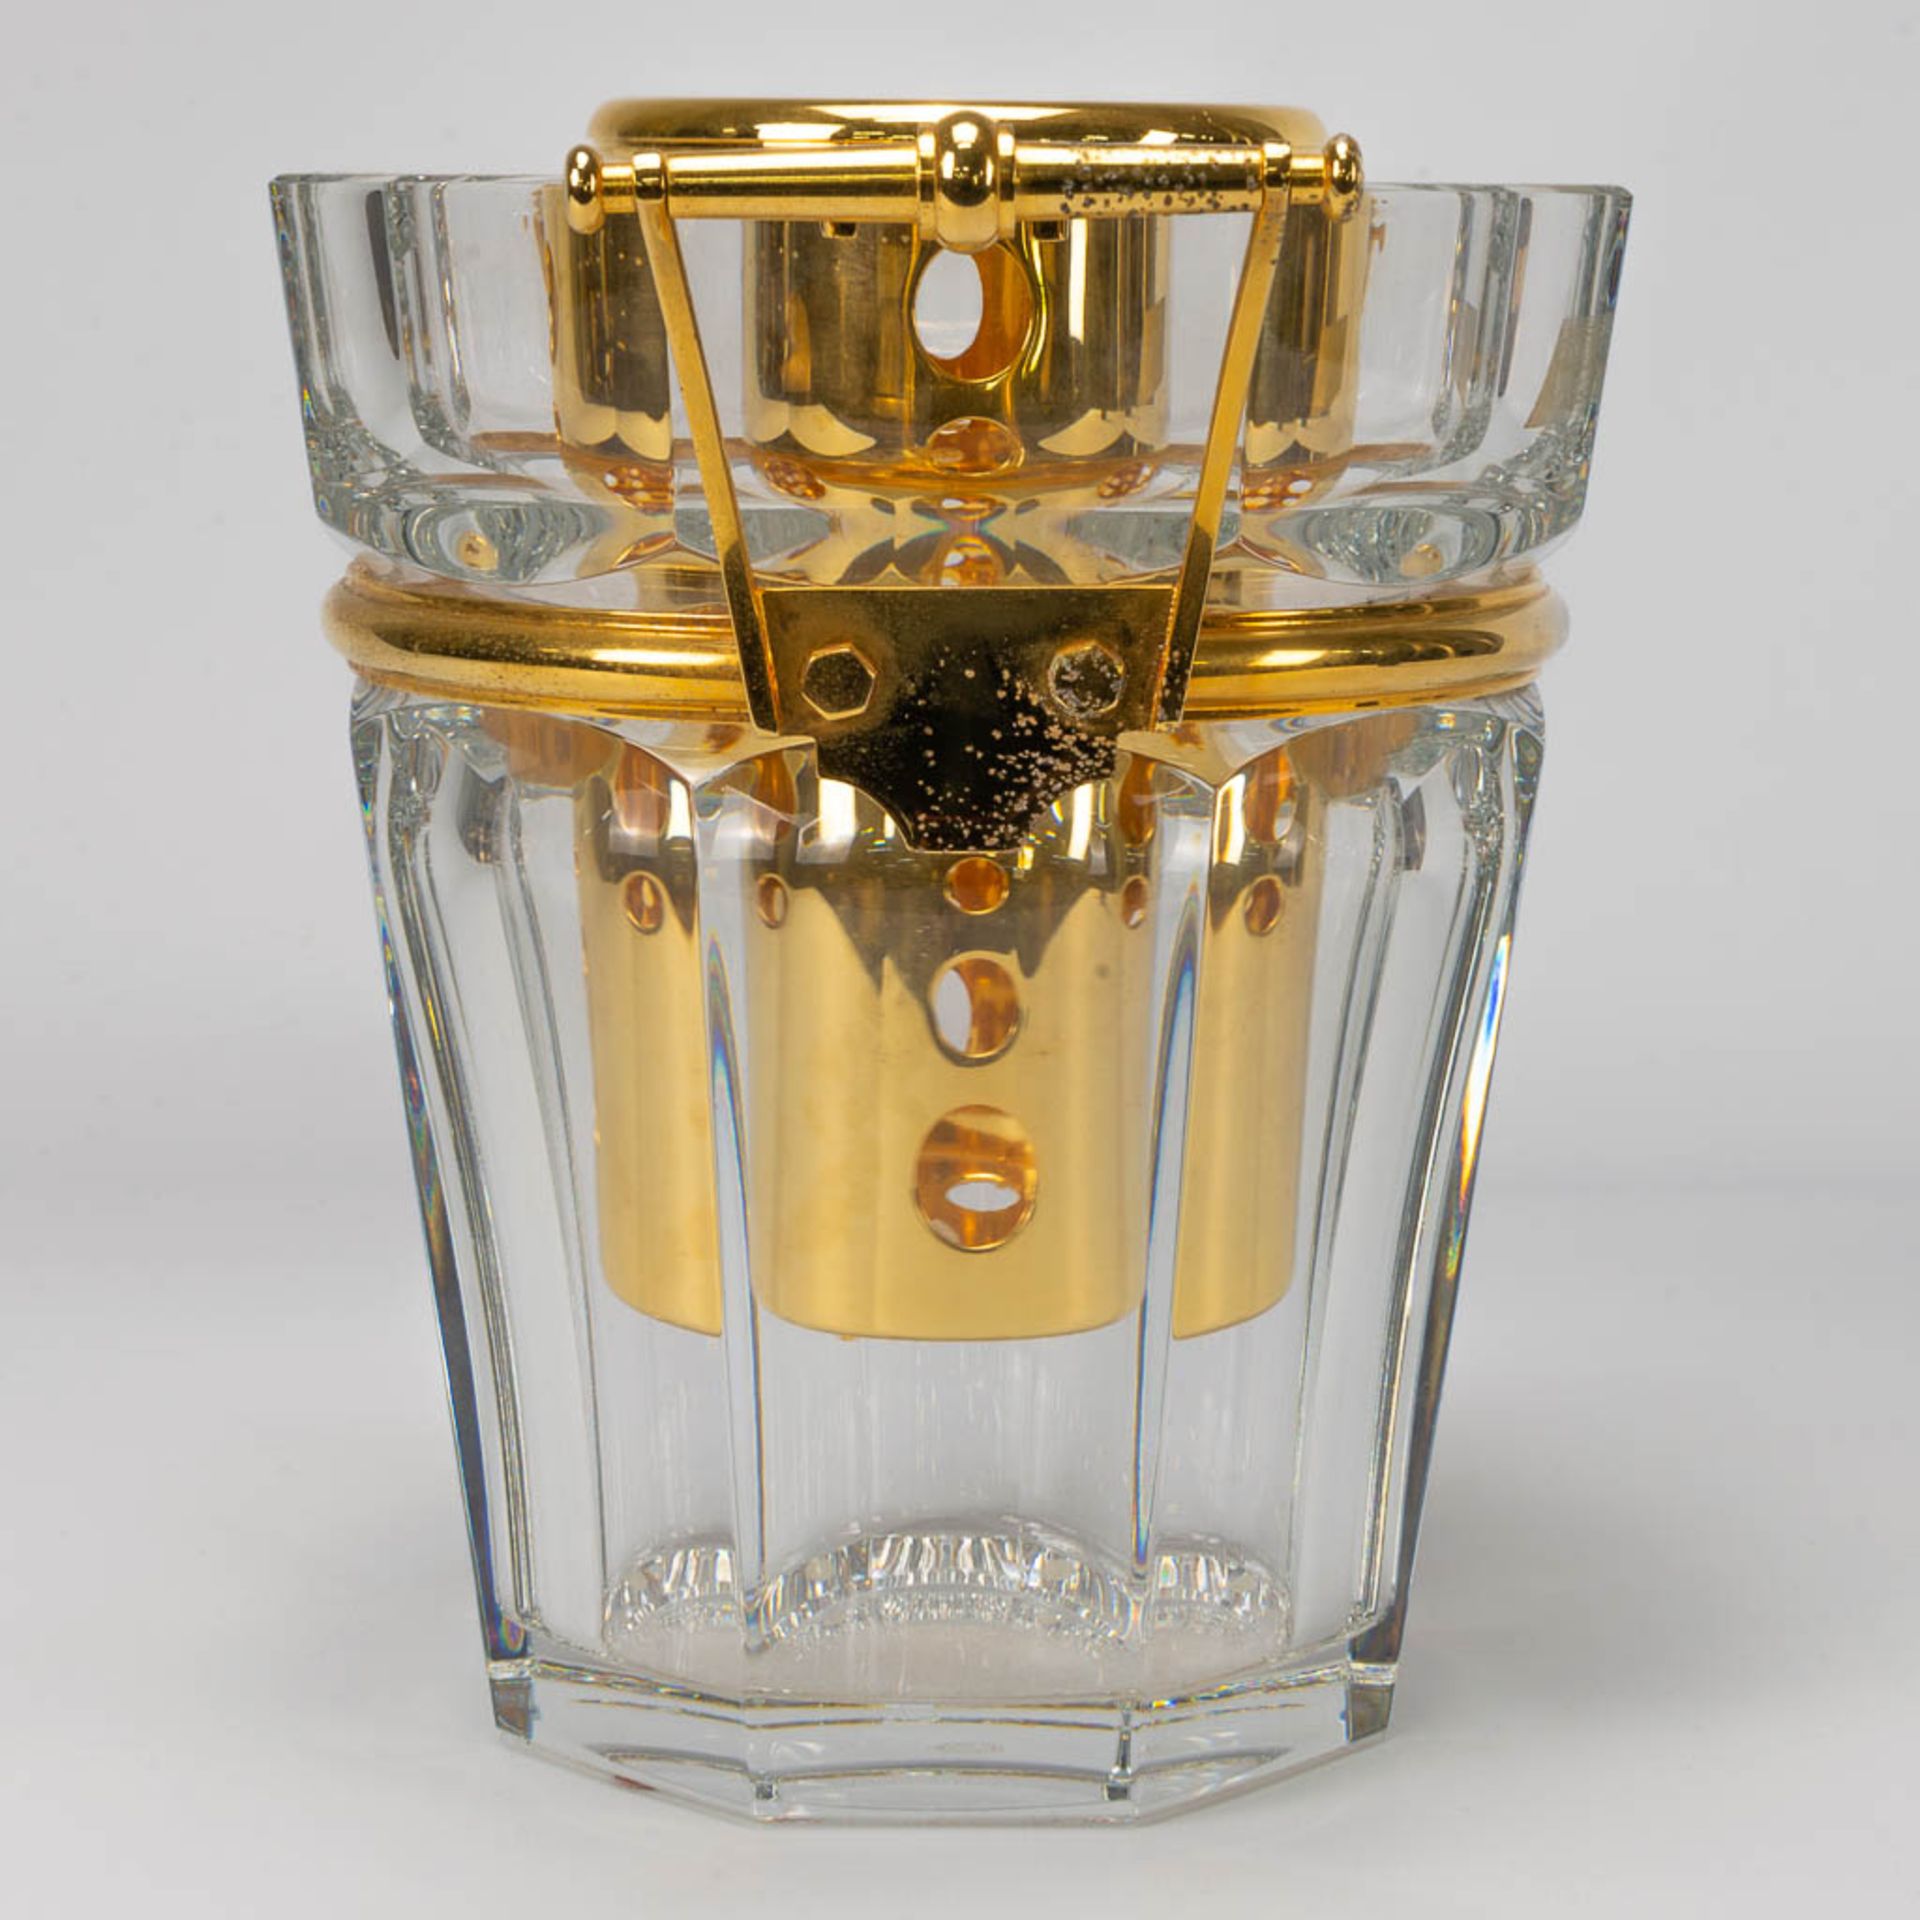 A Baccarat wine cooler or Champage bucket, made of Crystal with gold plated metal in the original bo - Image 3 of 12